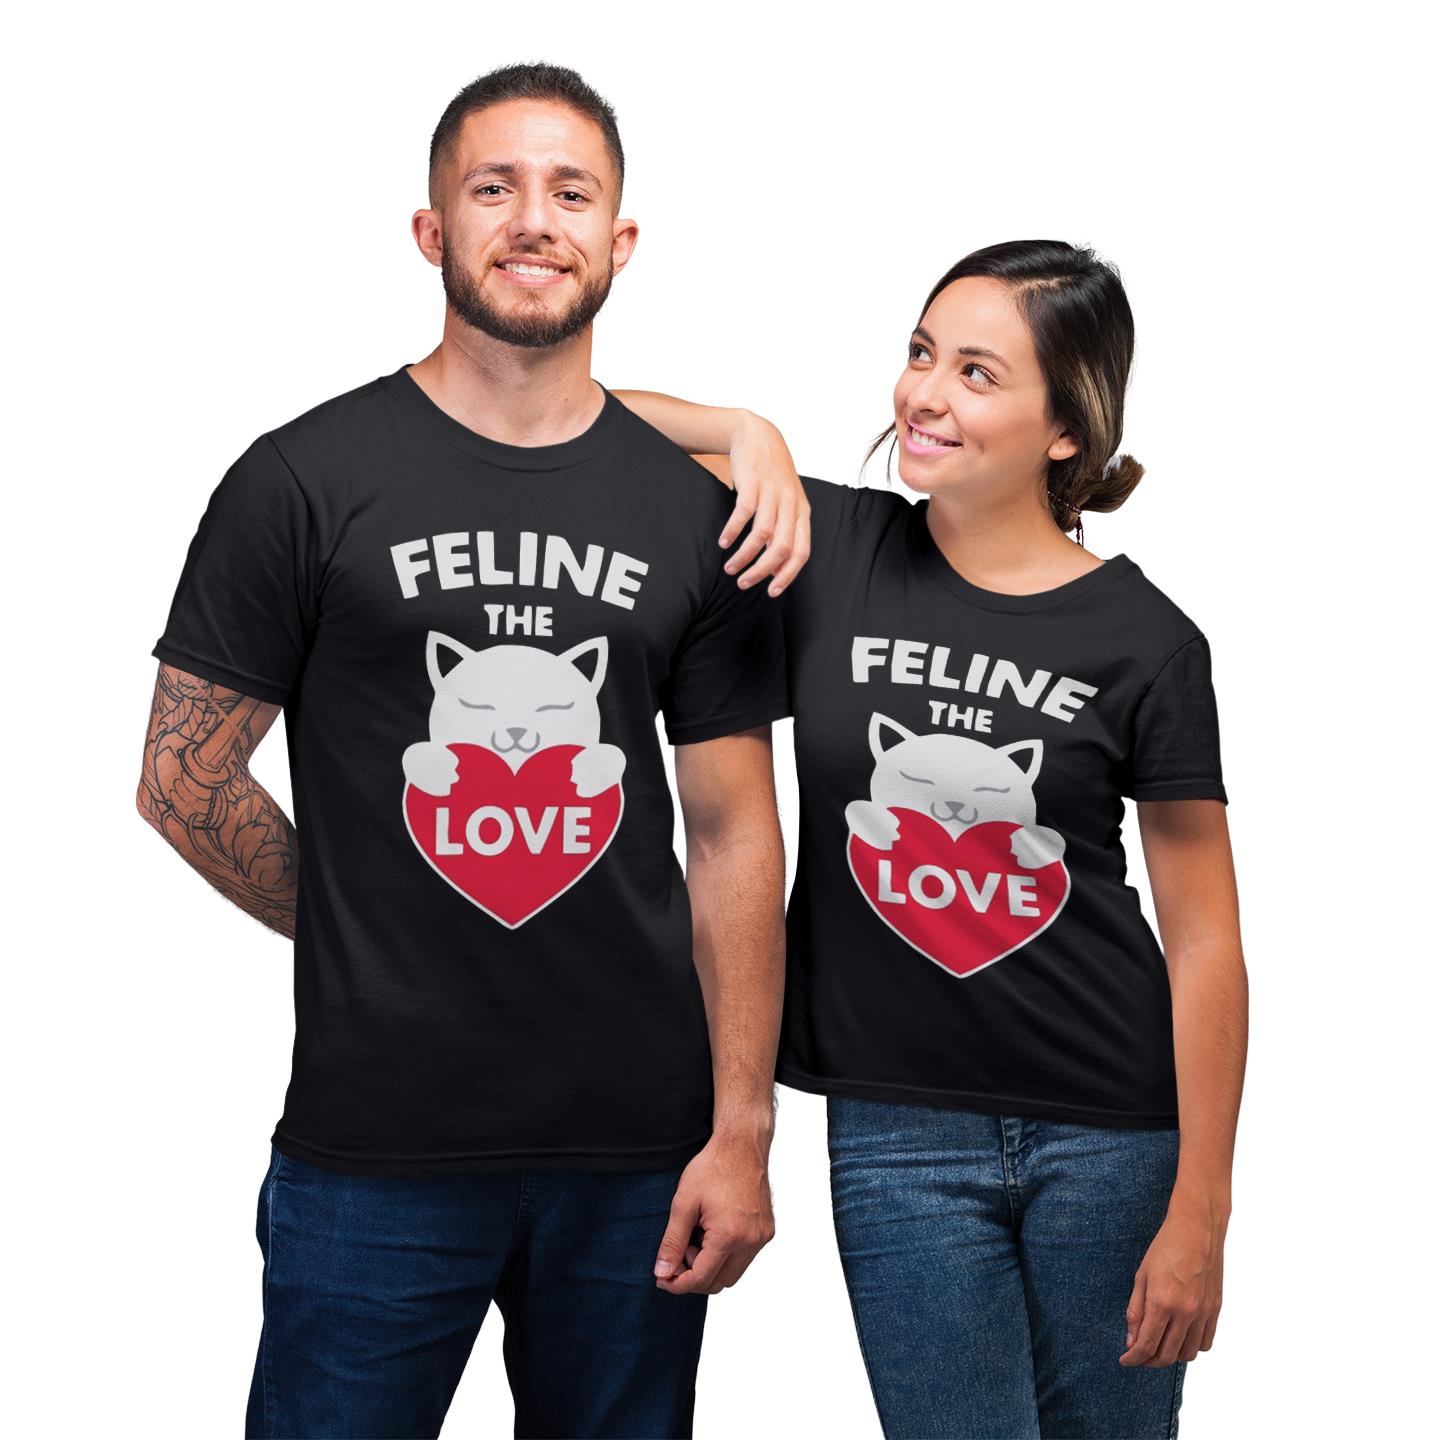 Feline The Love His And Her Shirt For Couples Lover Matching T-shirt